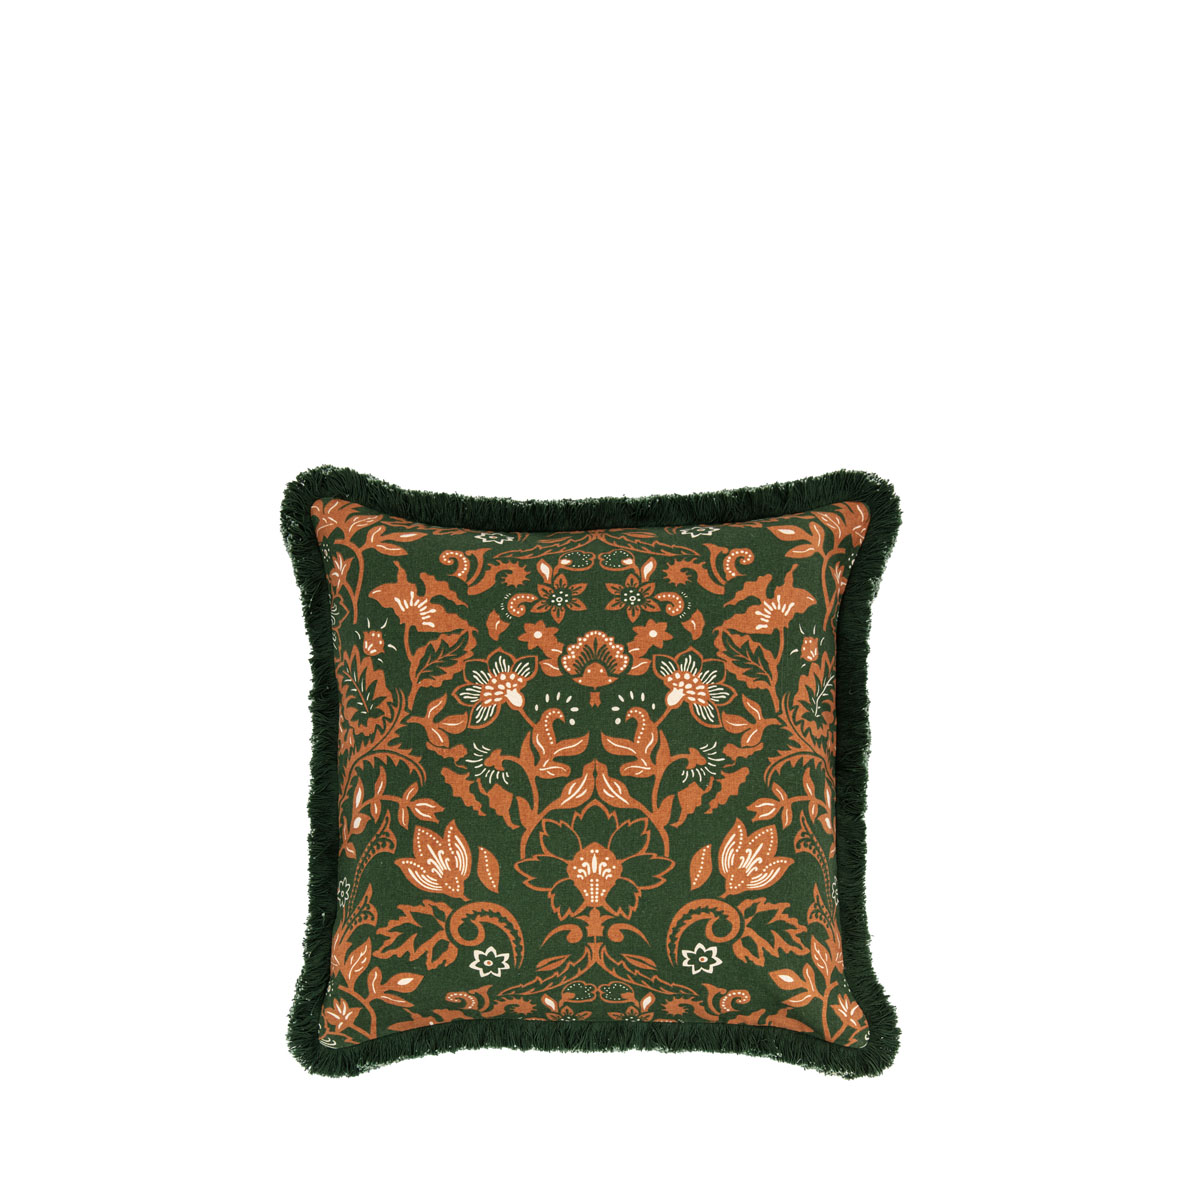 Botanist Cushion Cover Olive and Tan 450x450mm